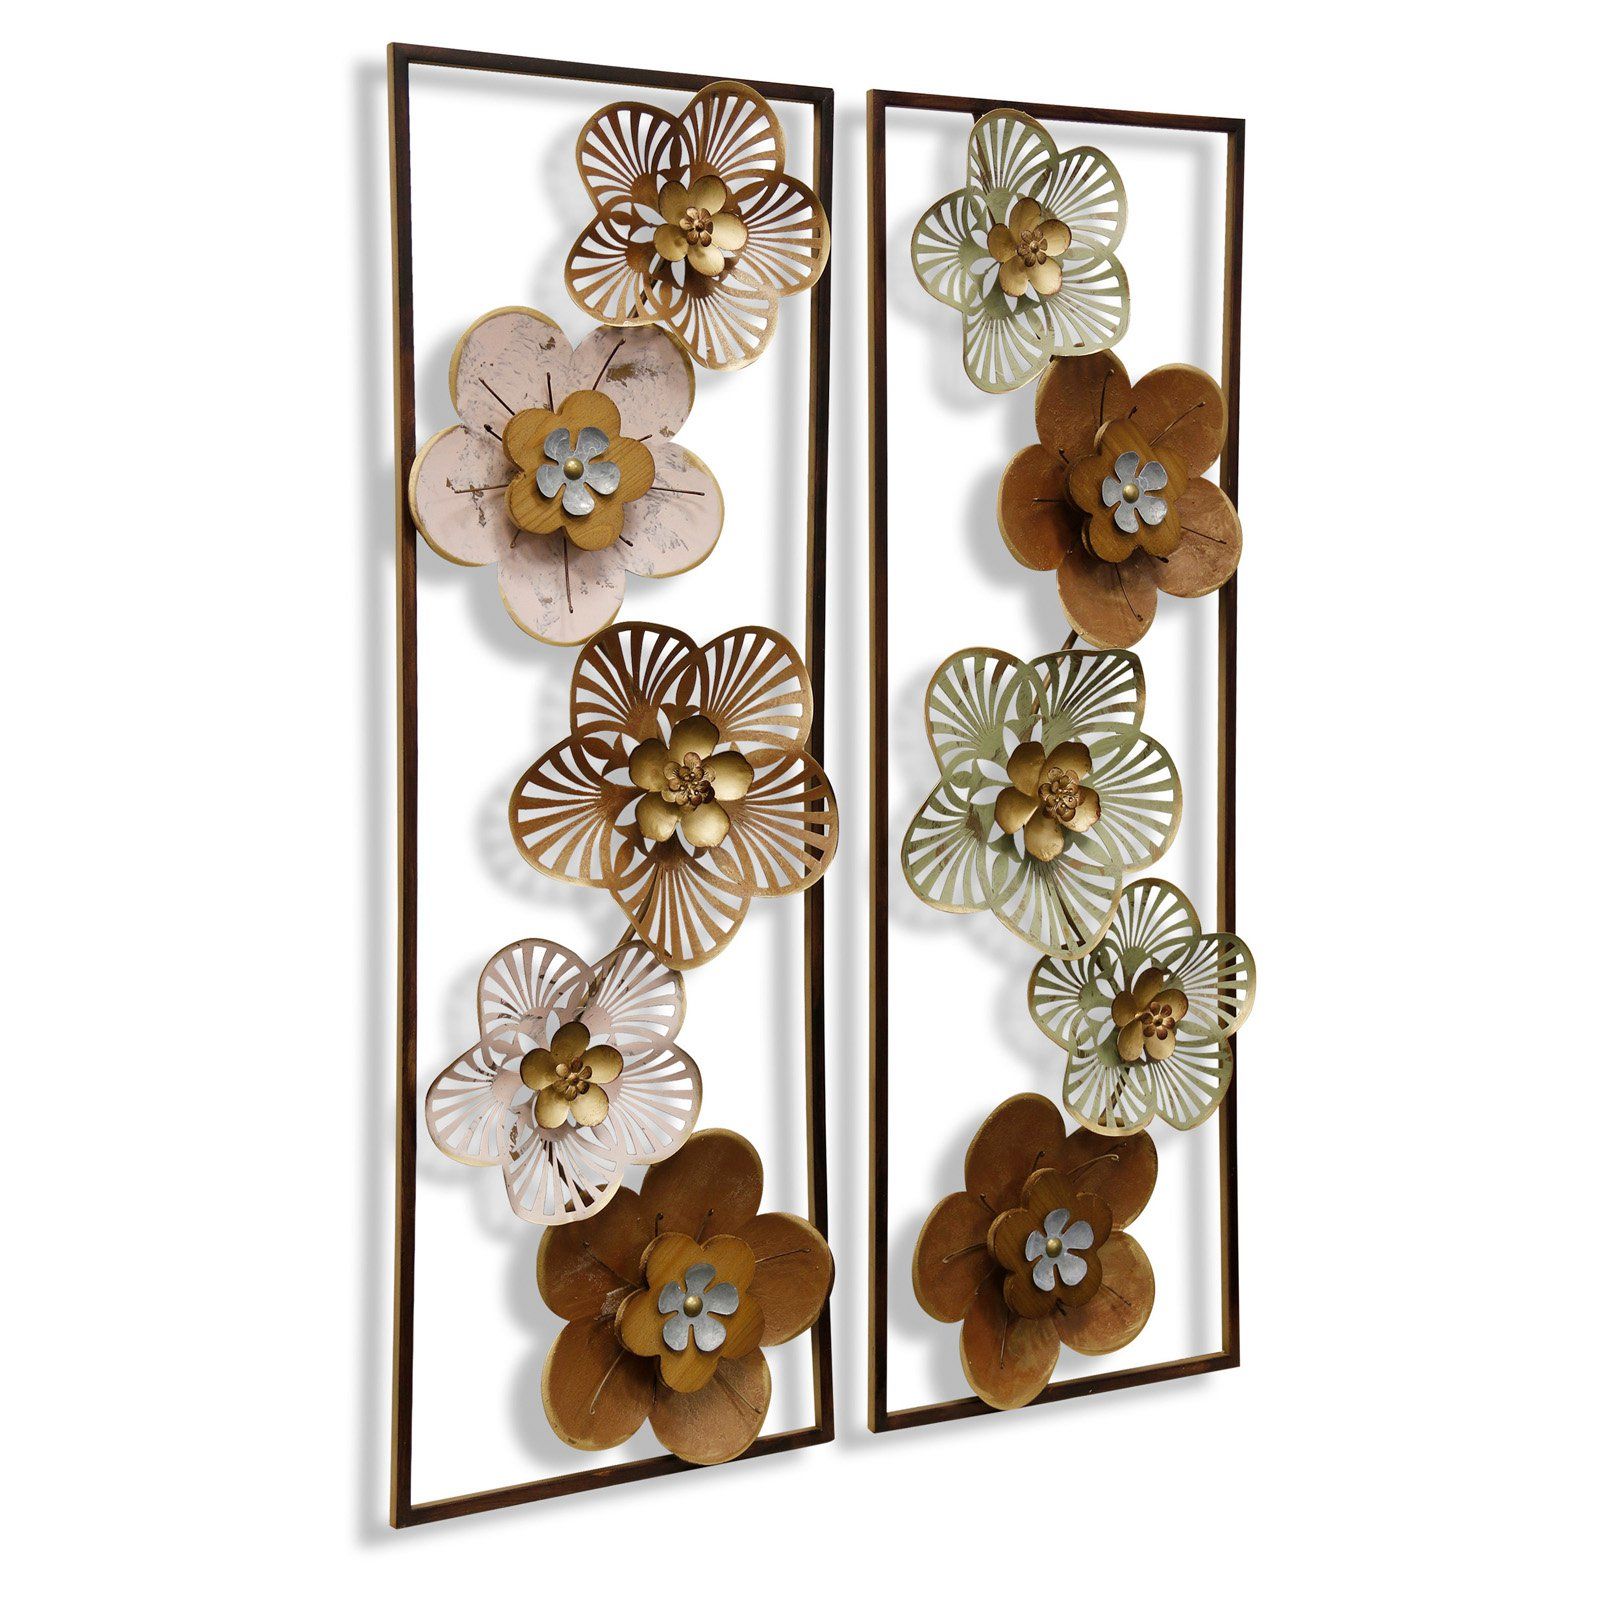 Panel Wood Wall Decor Sets (set Of 2) Within 2019 Stylecraft Floral Design Wall Sculptures – Set Of  (View 1 of 20)